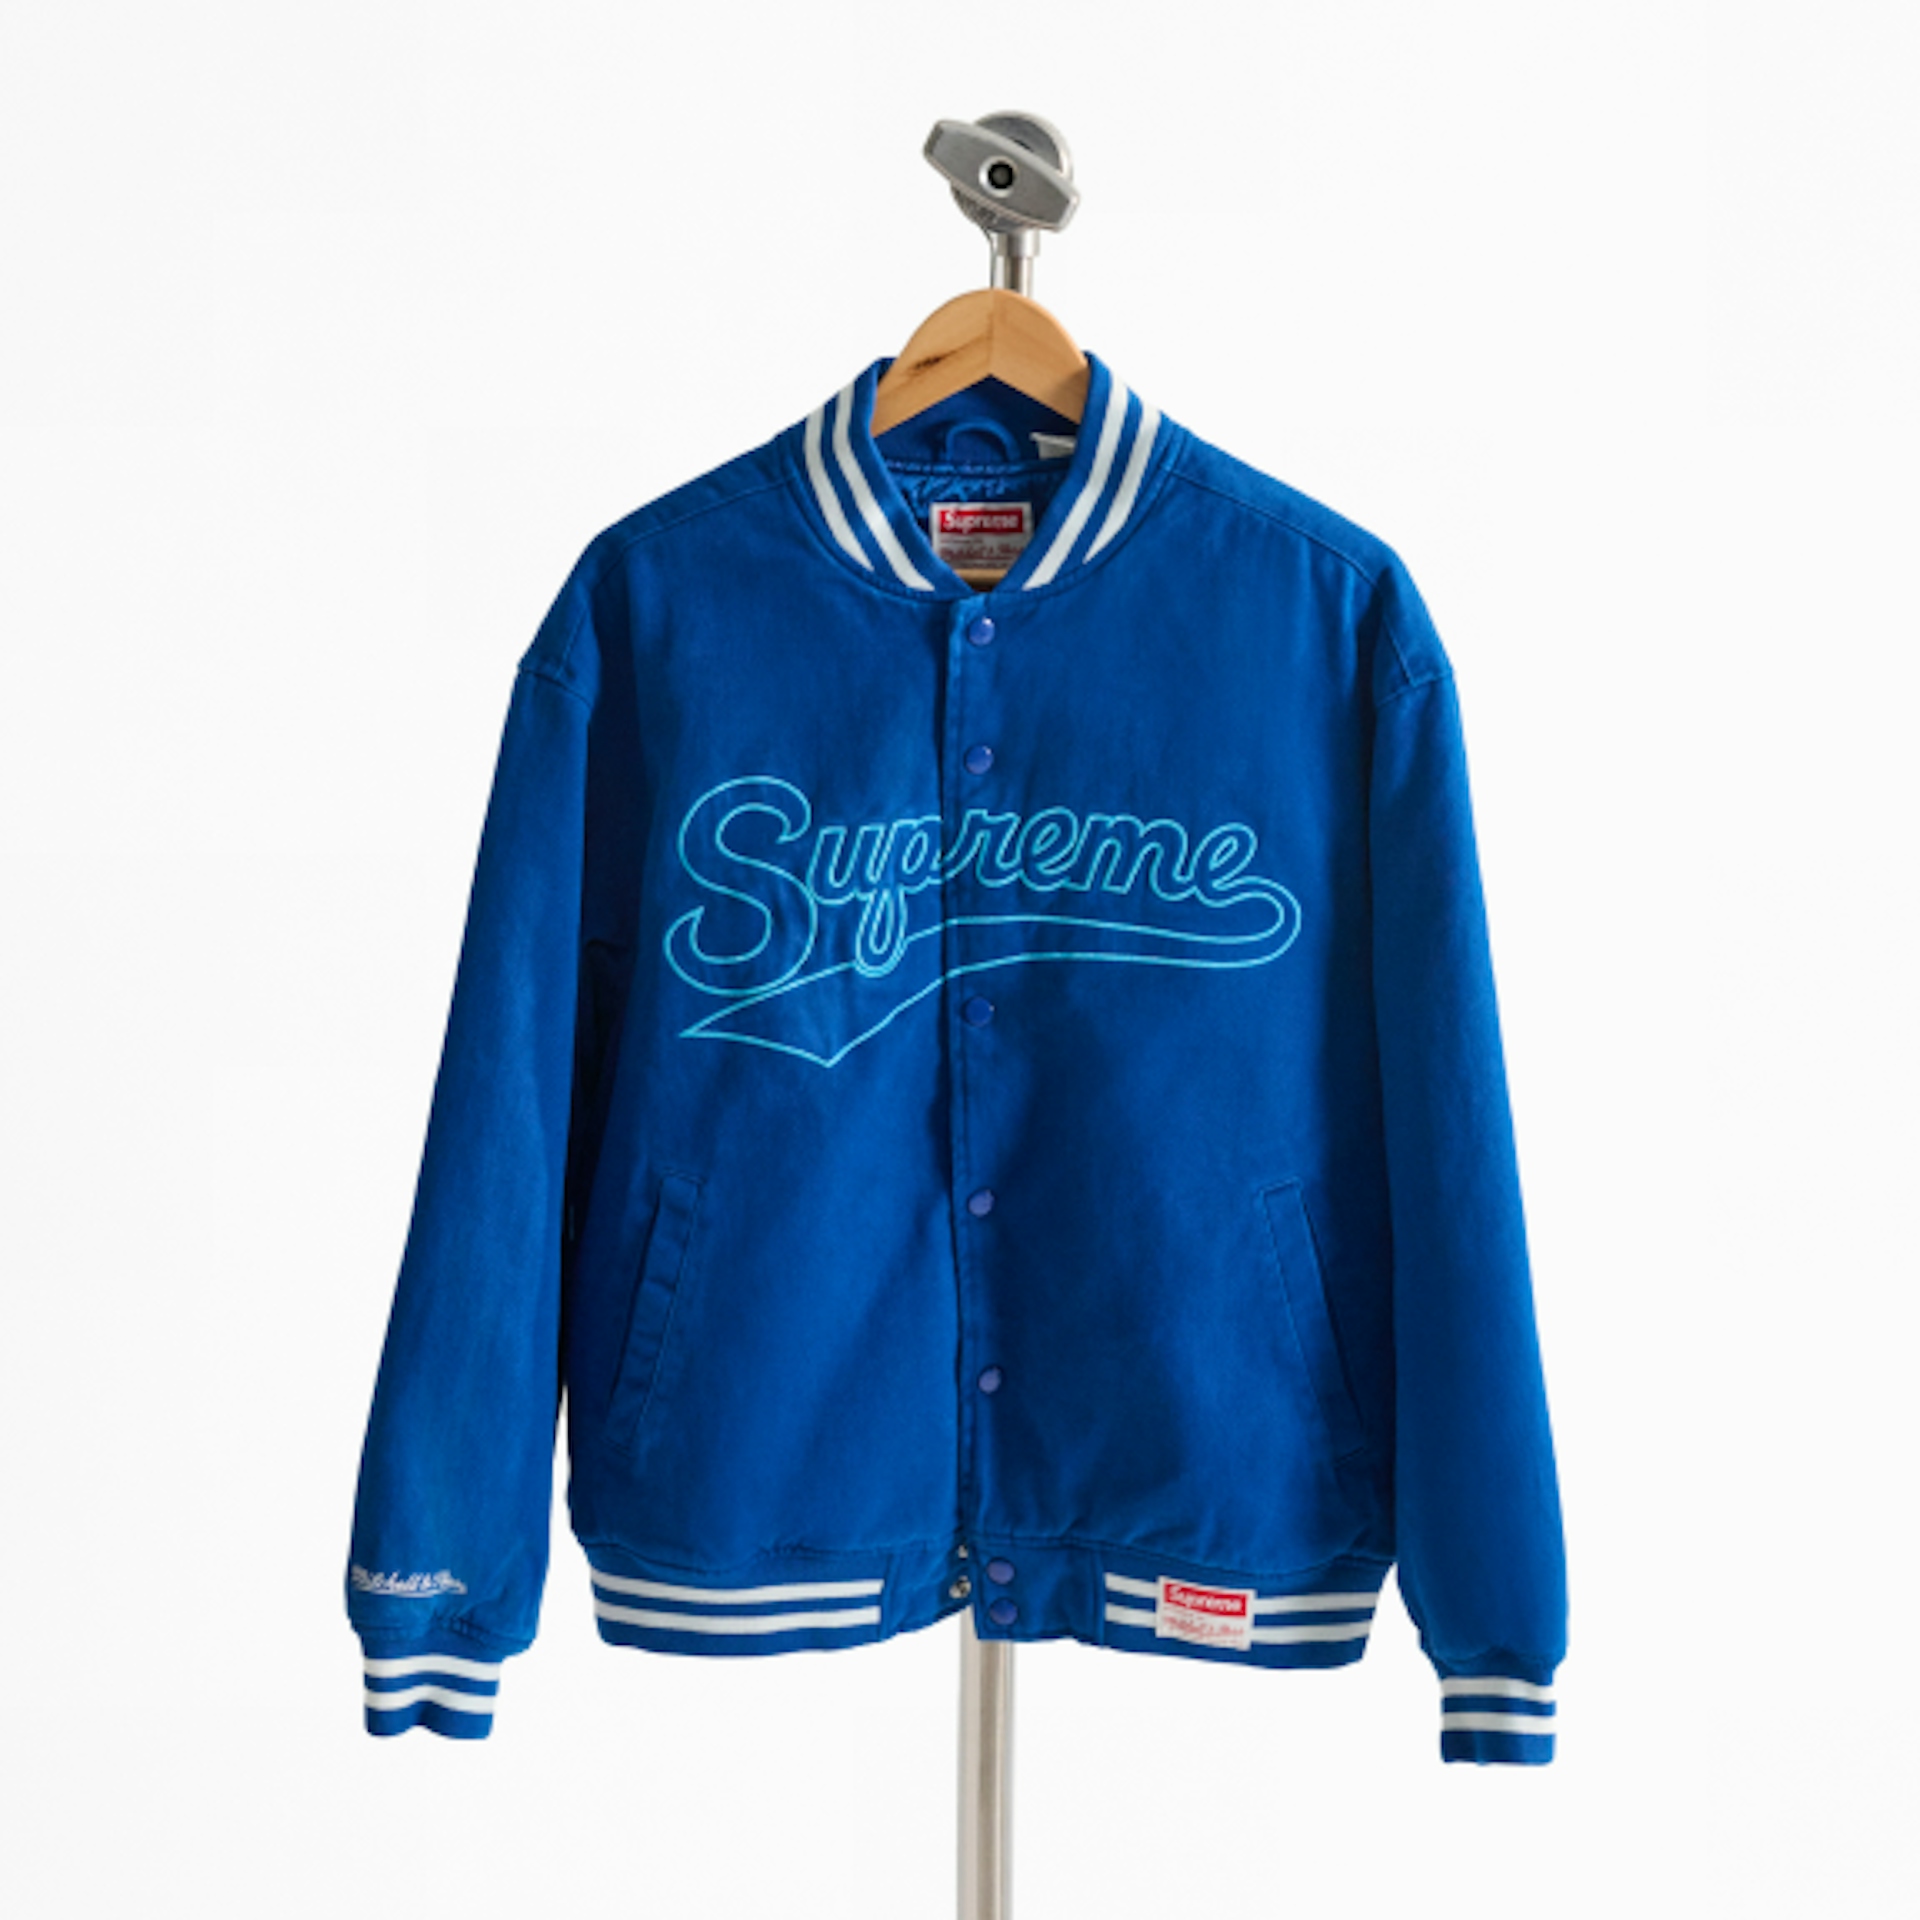 A blue Supreme varsity jacket is displayed on a hanger. The jacket features the word "Supreme" written in a cursive style on the front, with white striped accents on the collar, cuffs, and hem.